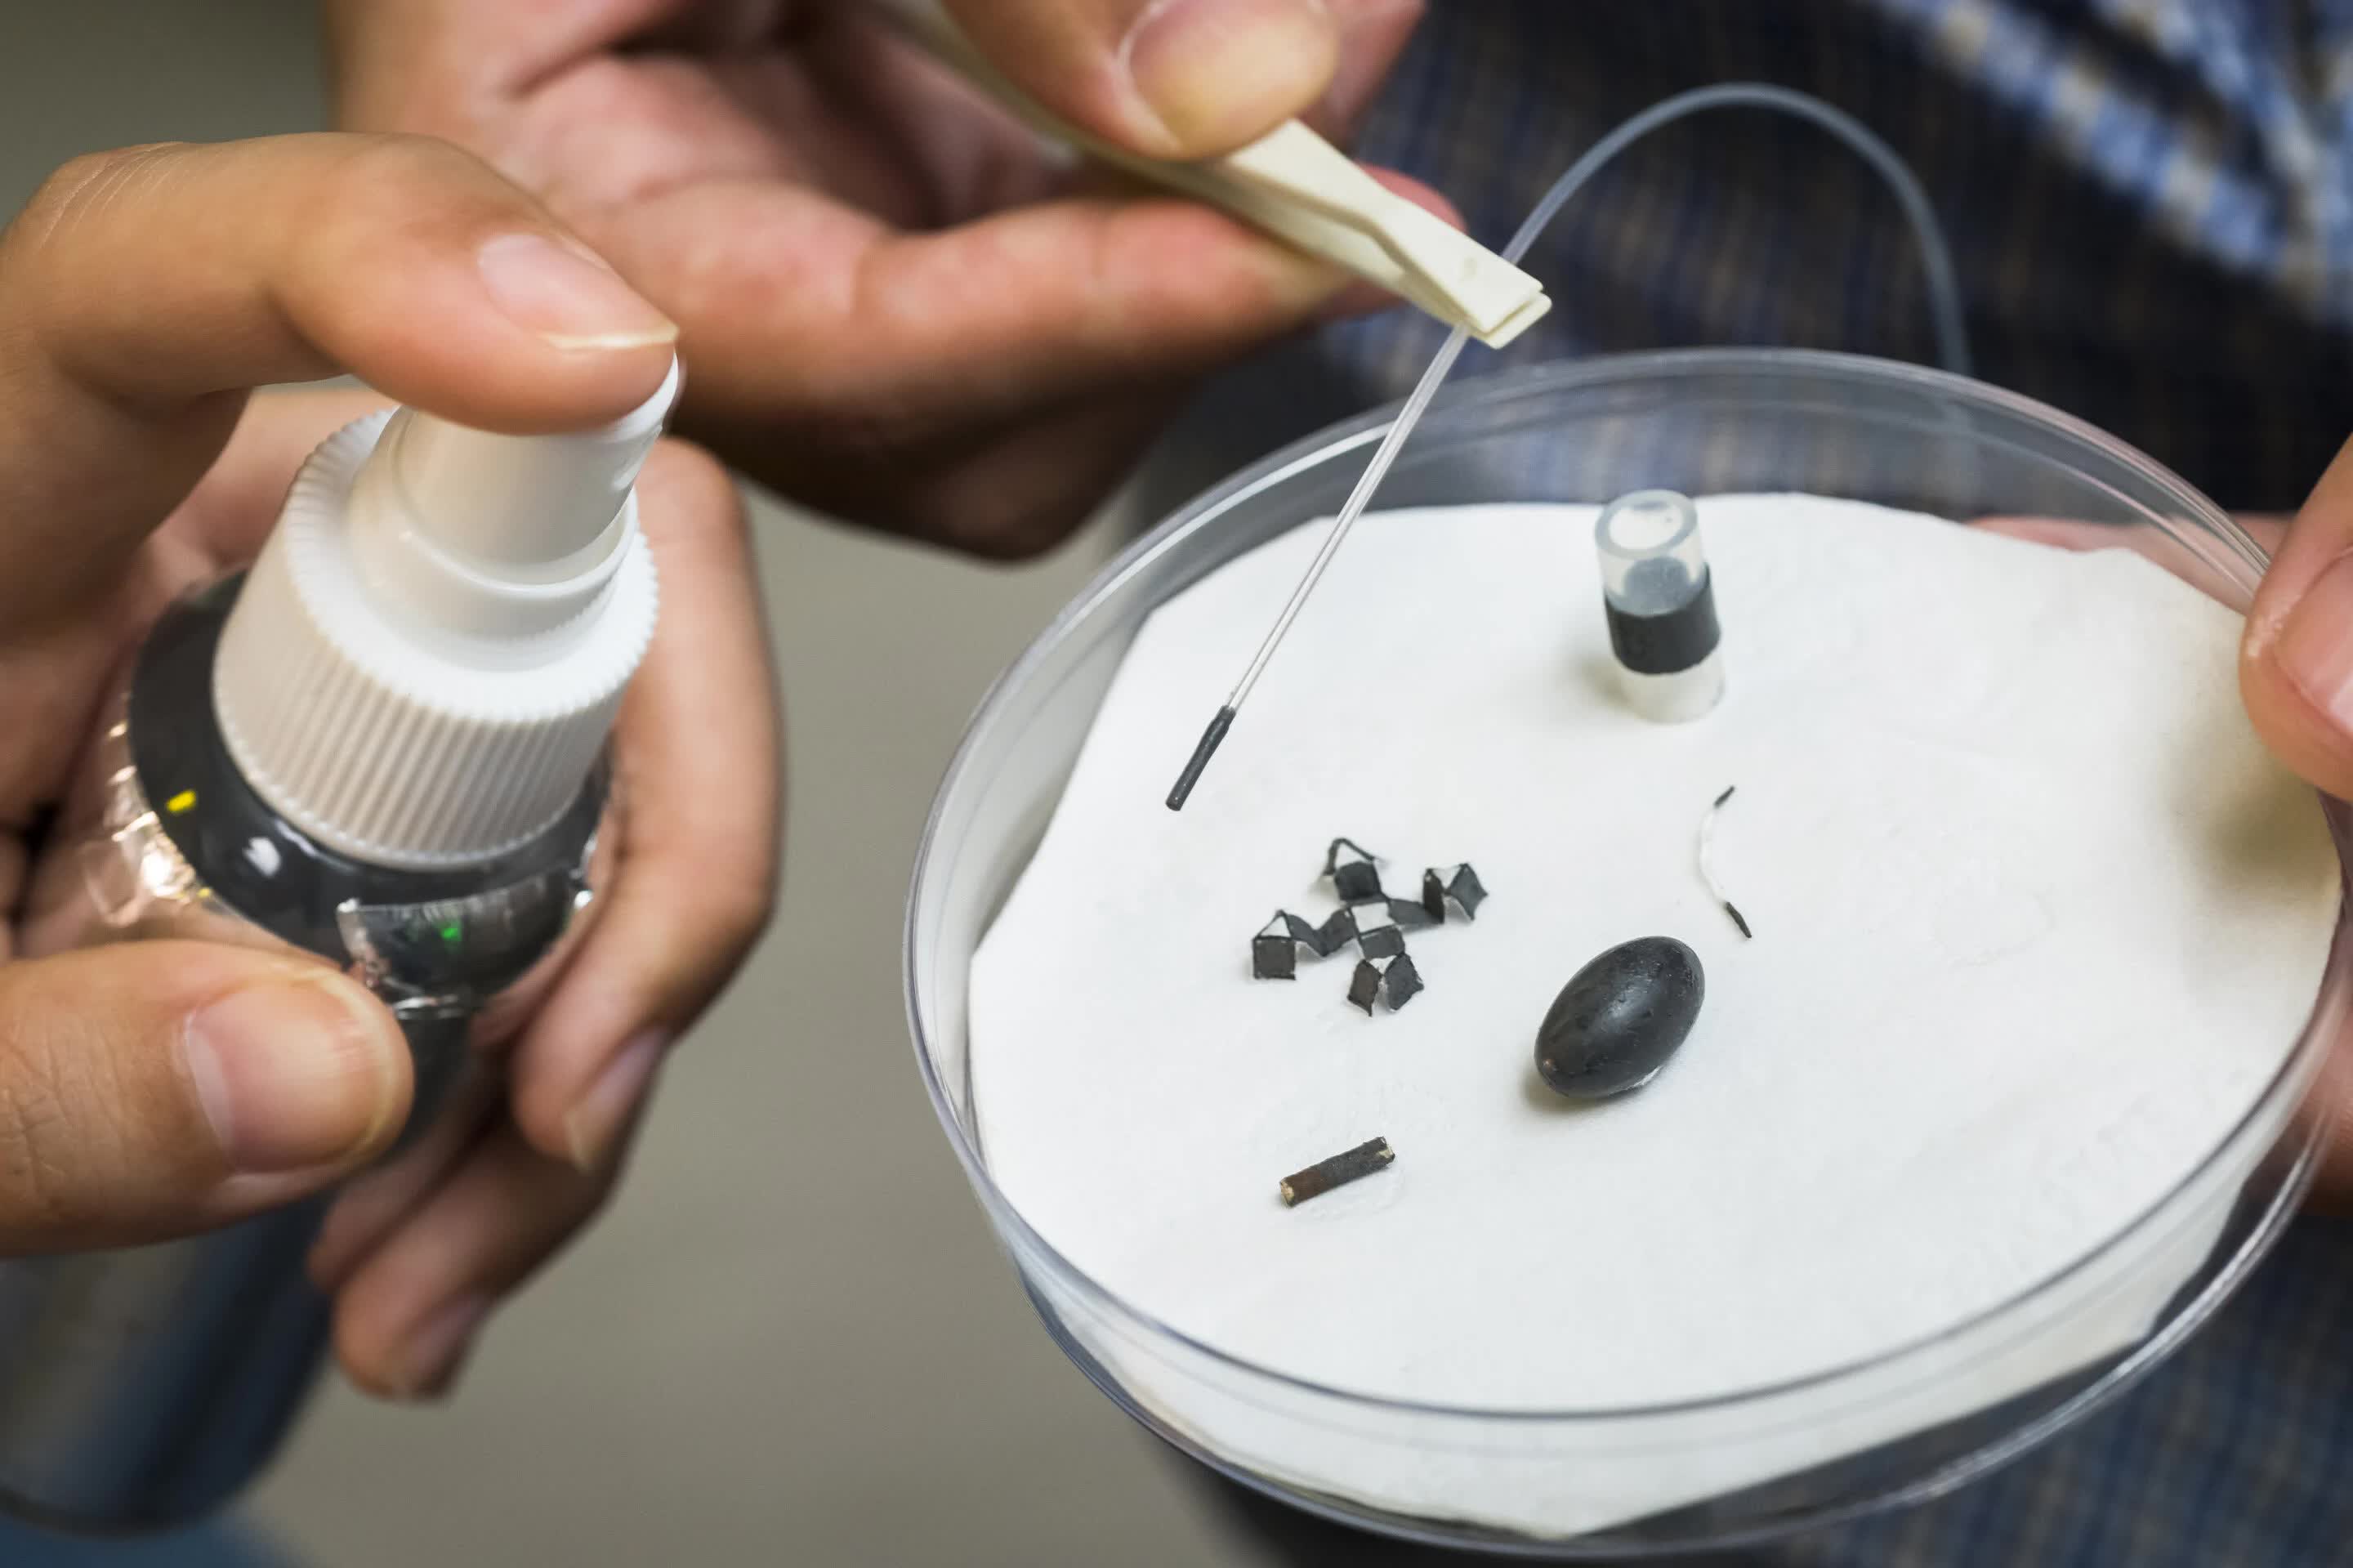 Magnetic spray coating used to create tiny, movable robots